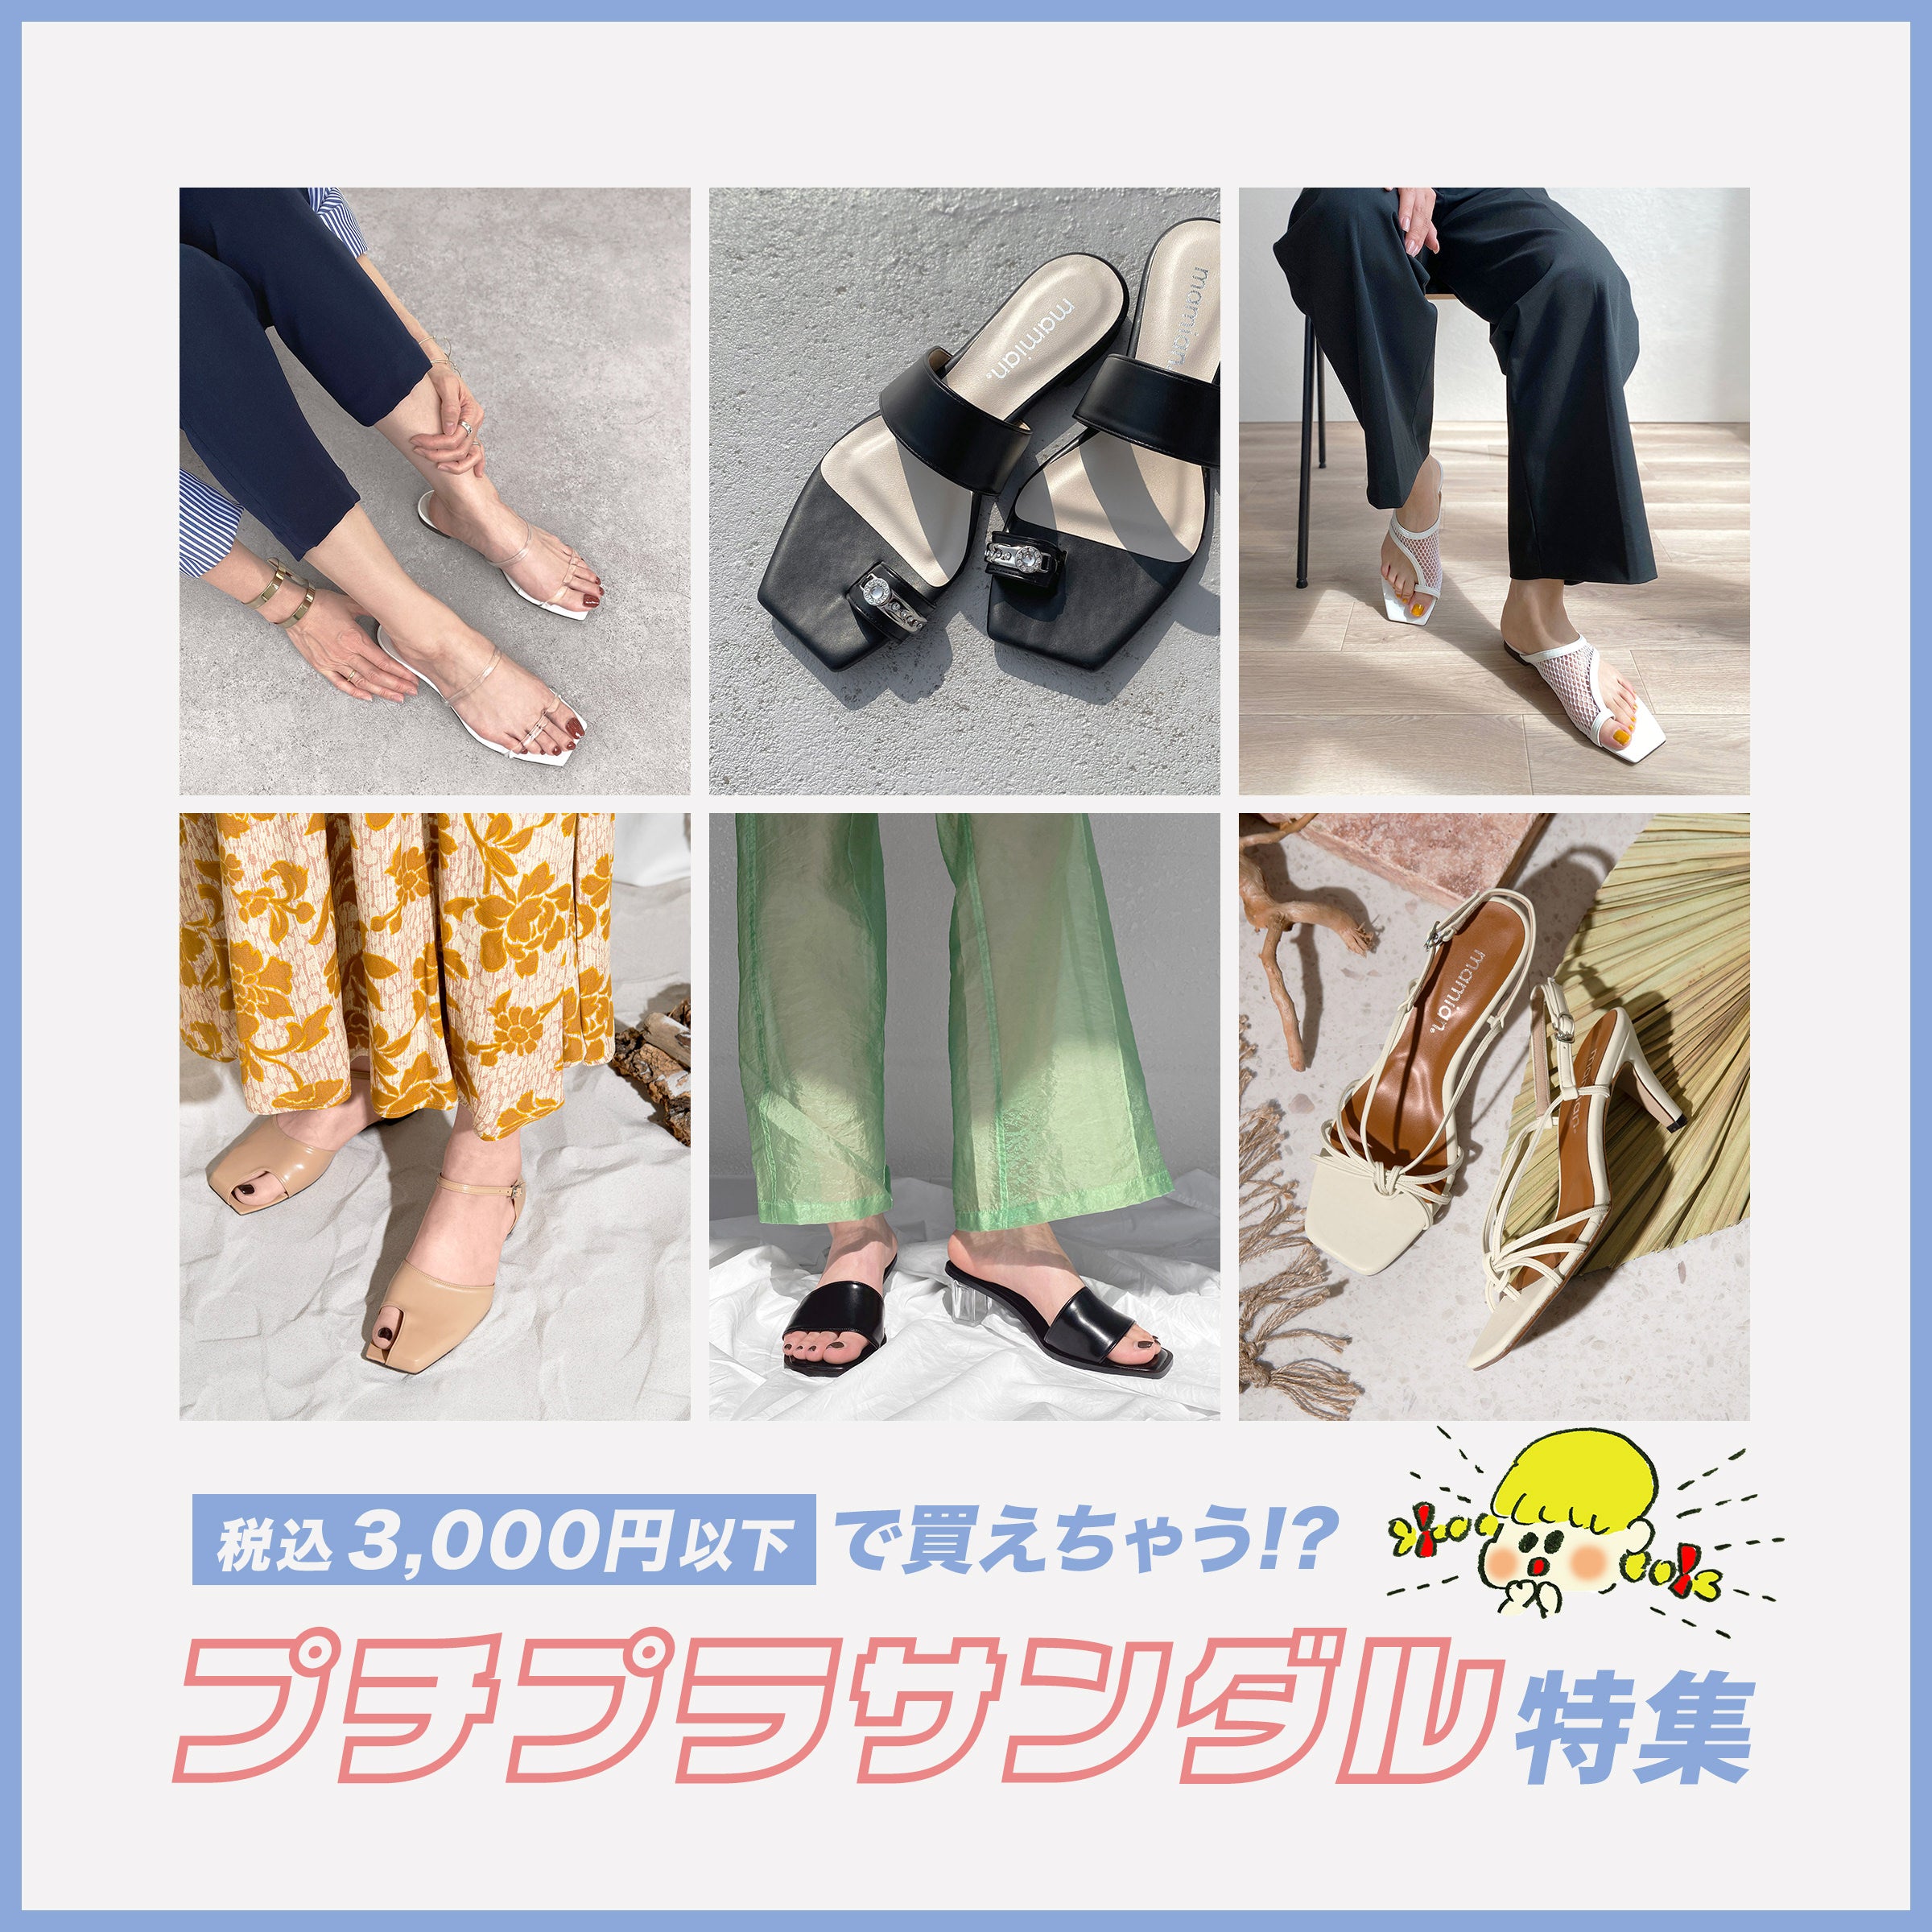 You can buy them for under 3000 yen!? Special feature on affordable sandals